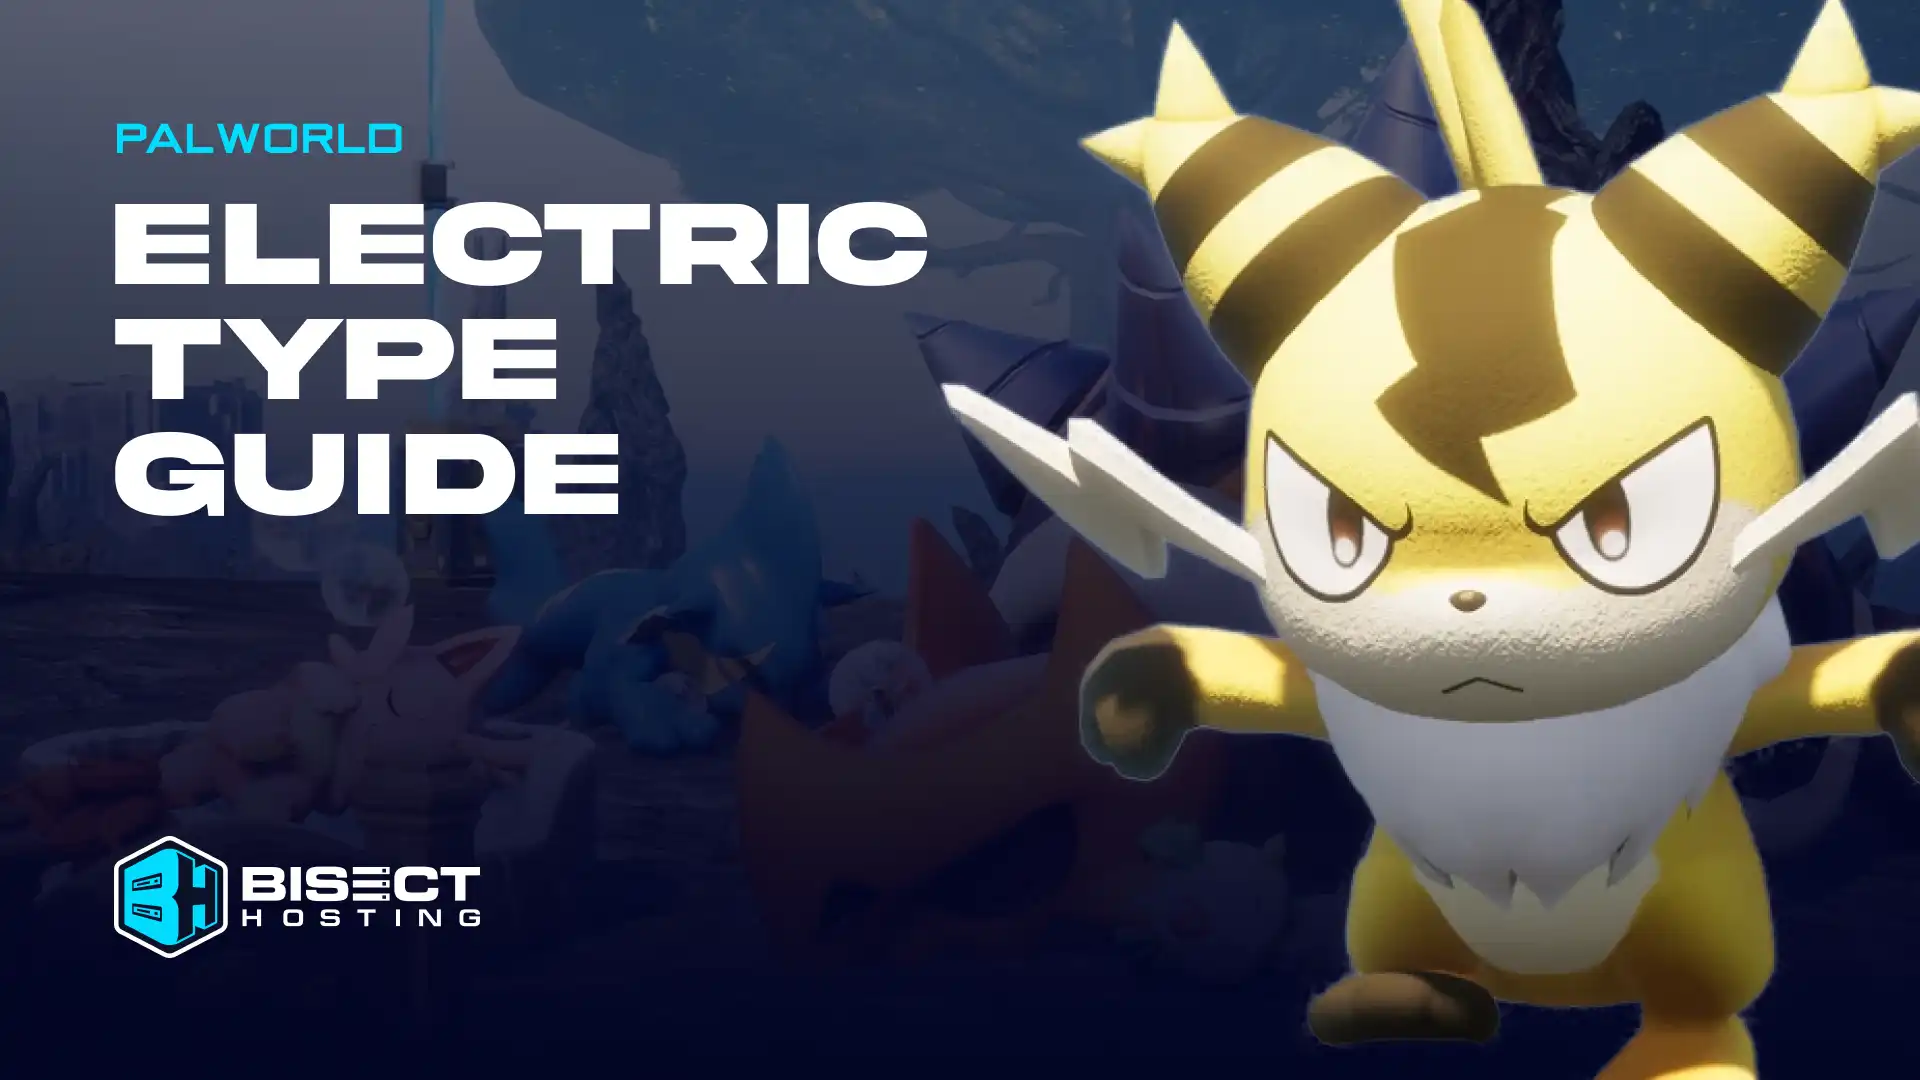 Palworld Electric Type Guide: All Electric Pals, Locations, Skills, Drops, & Work Suitability